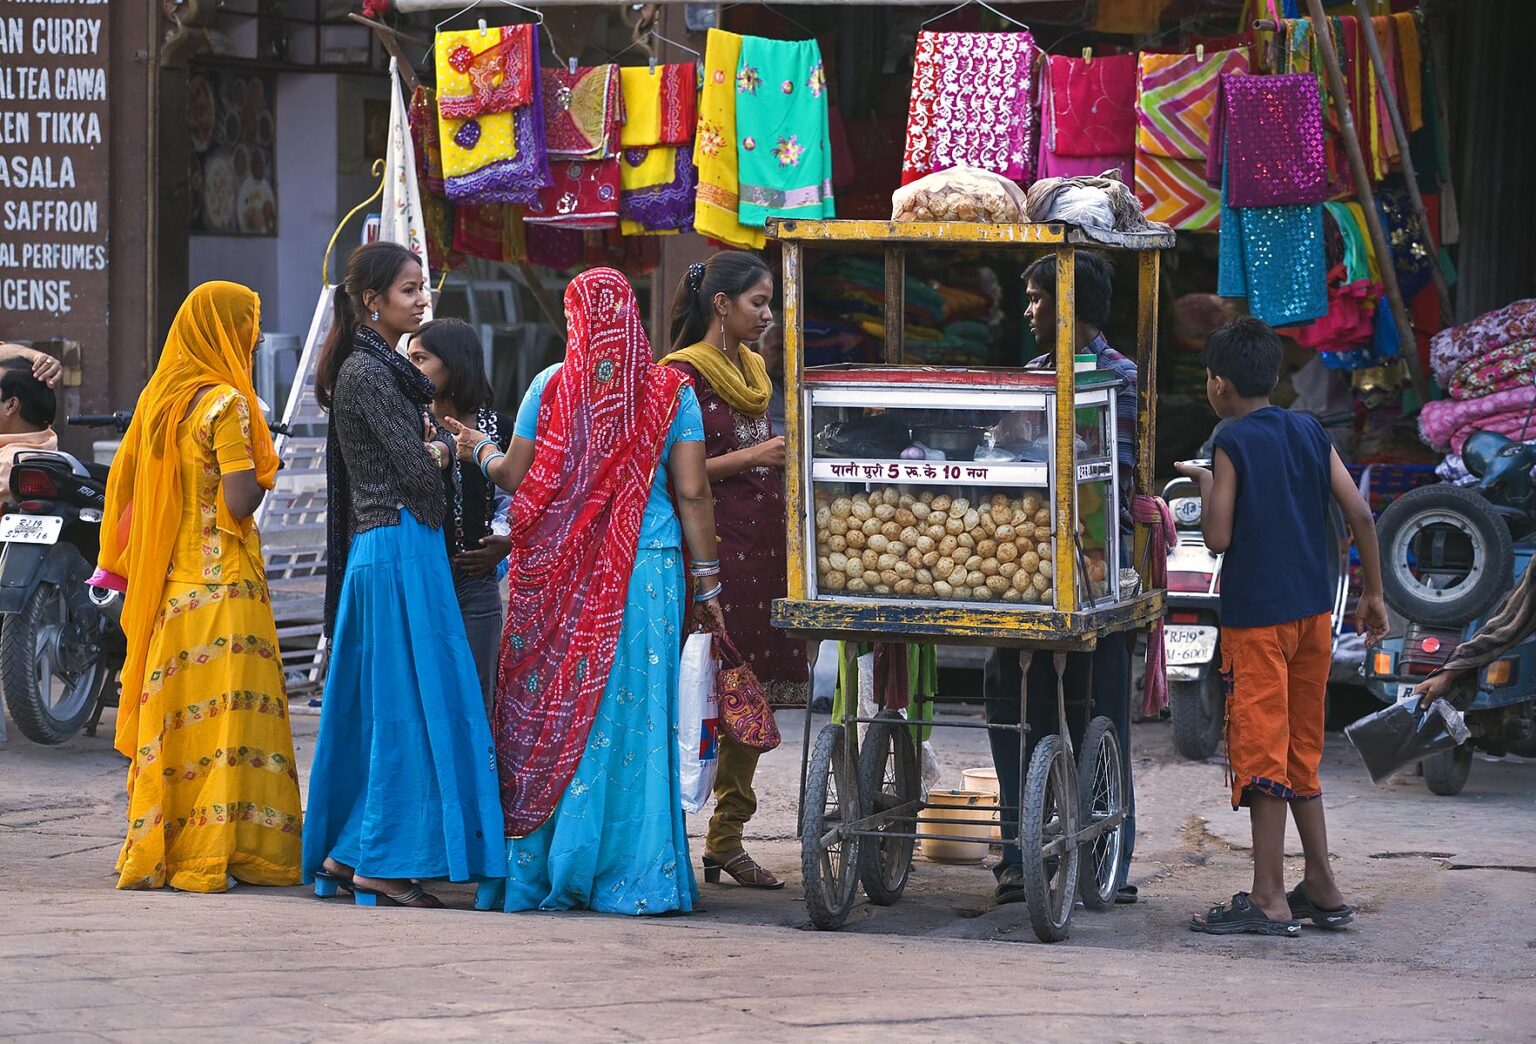 Young girls buy a snack at a food stall in SARDAR MARKET CIRDIKOT in JOHDPUR known as the BLUE CITY - RAJASTHAN, INDI